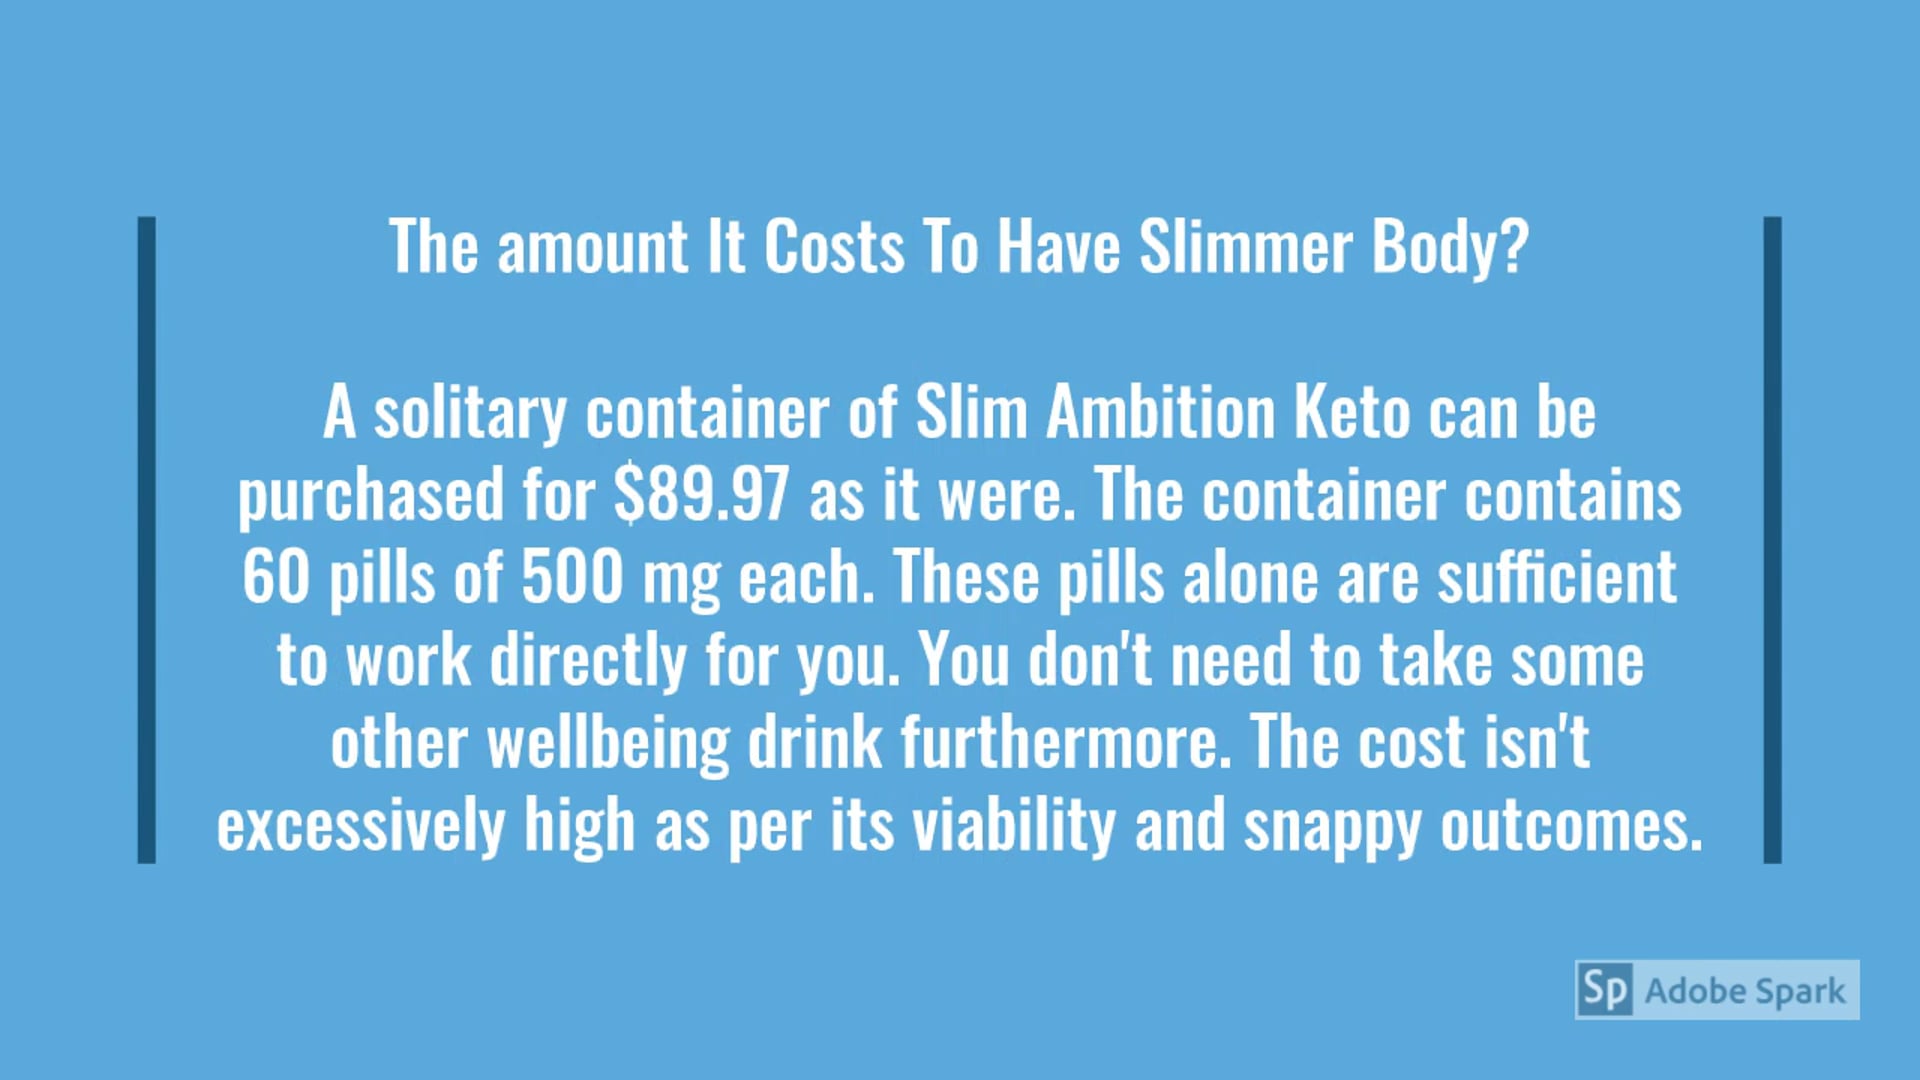 Slim Ambition Keto Comments: Side effects, benefits and more